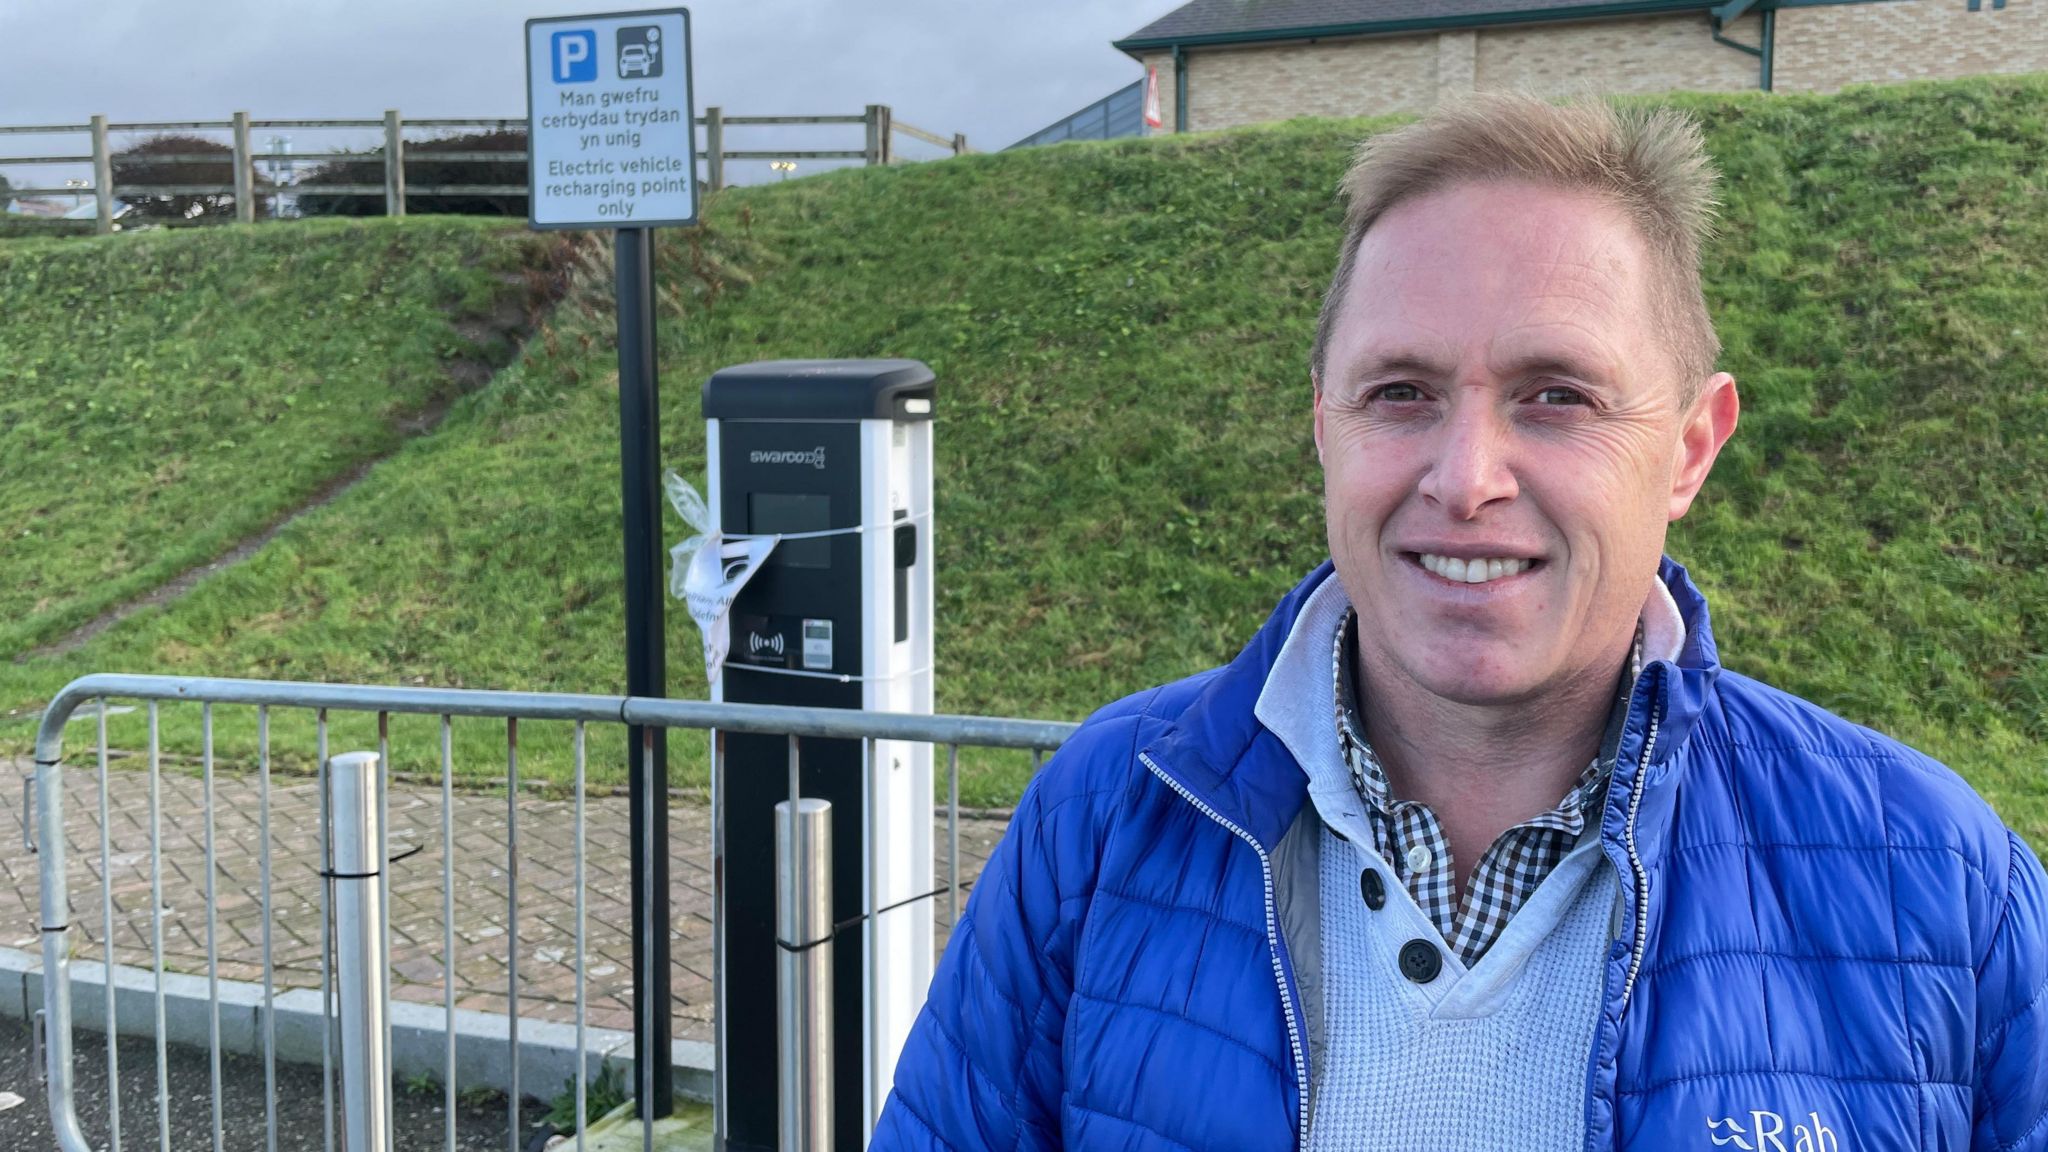 EV driver Aled Jones stands by one of the unconnected charge points in Caernarfon, with a barrier between him and the EV point